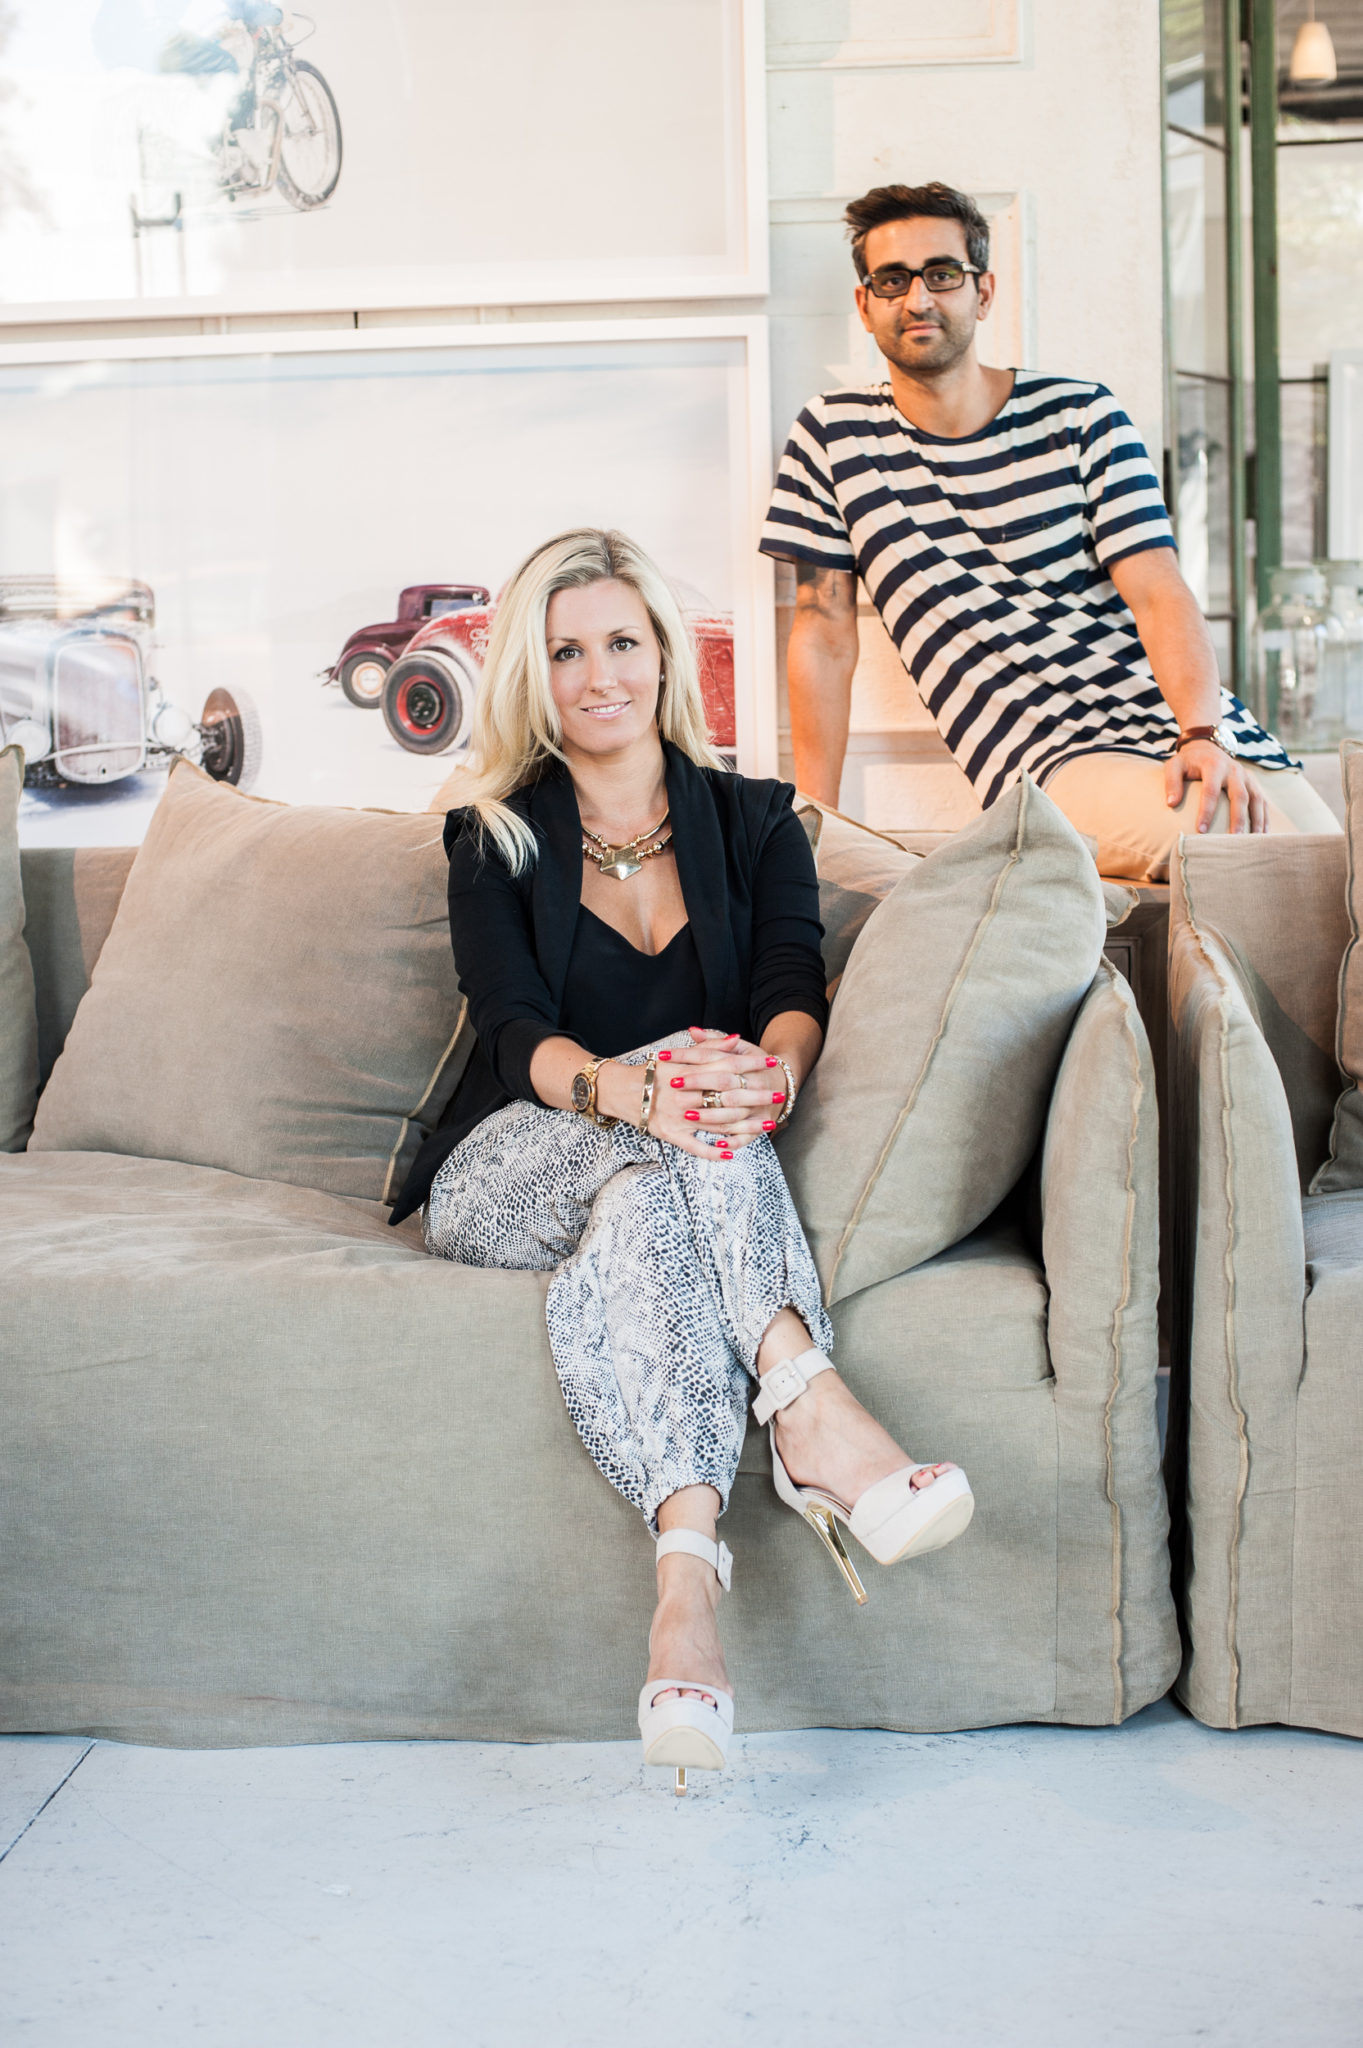 Urban Couture founders Katriarna and Tom